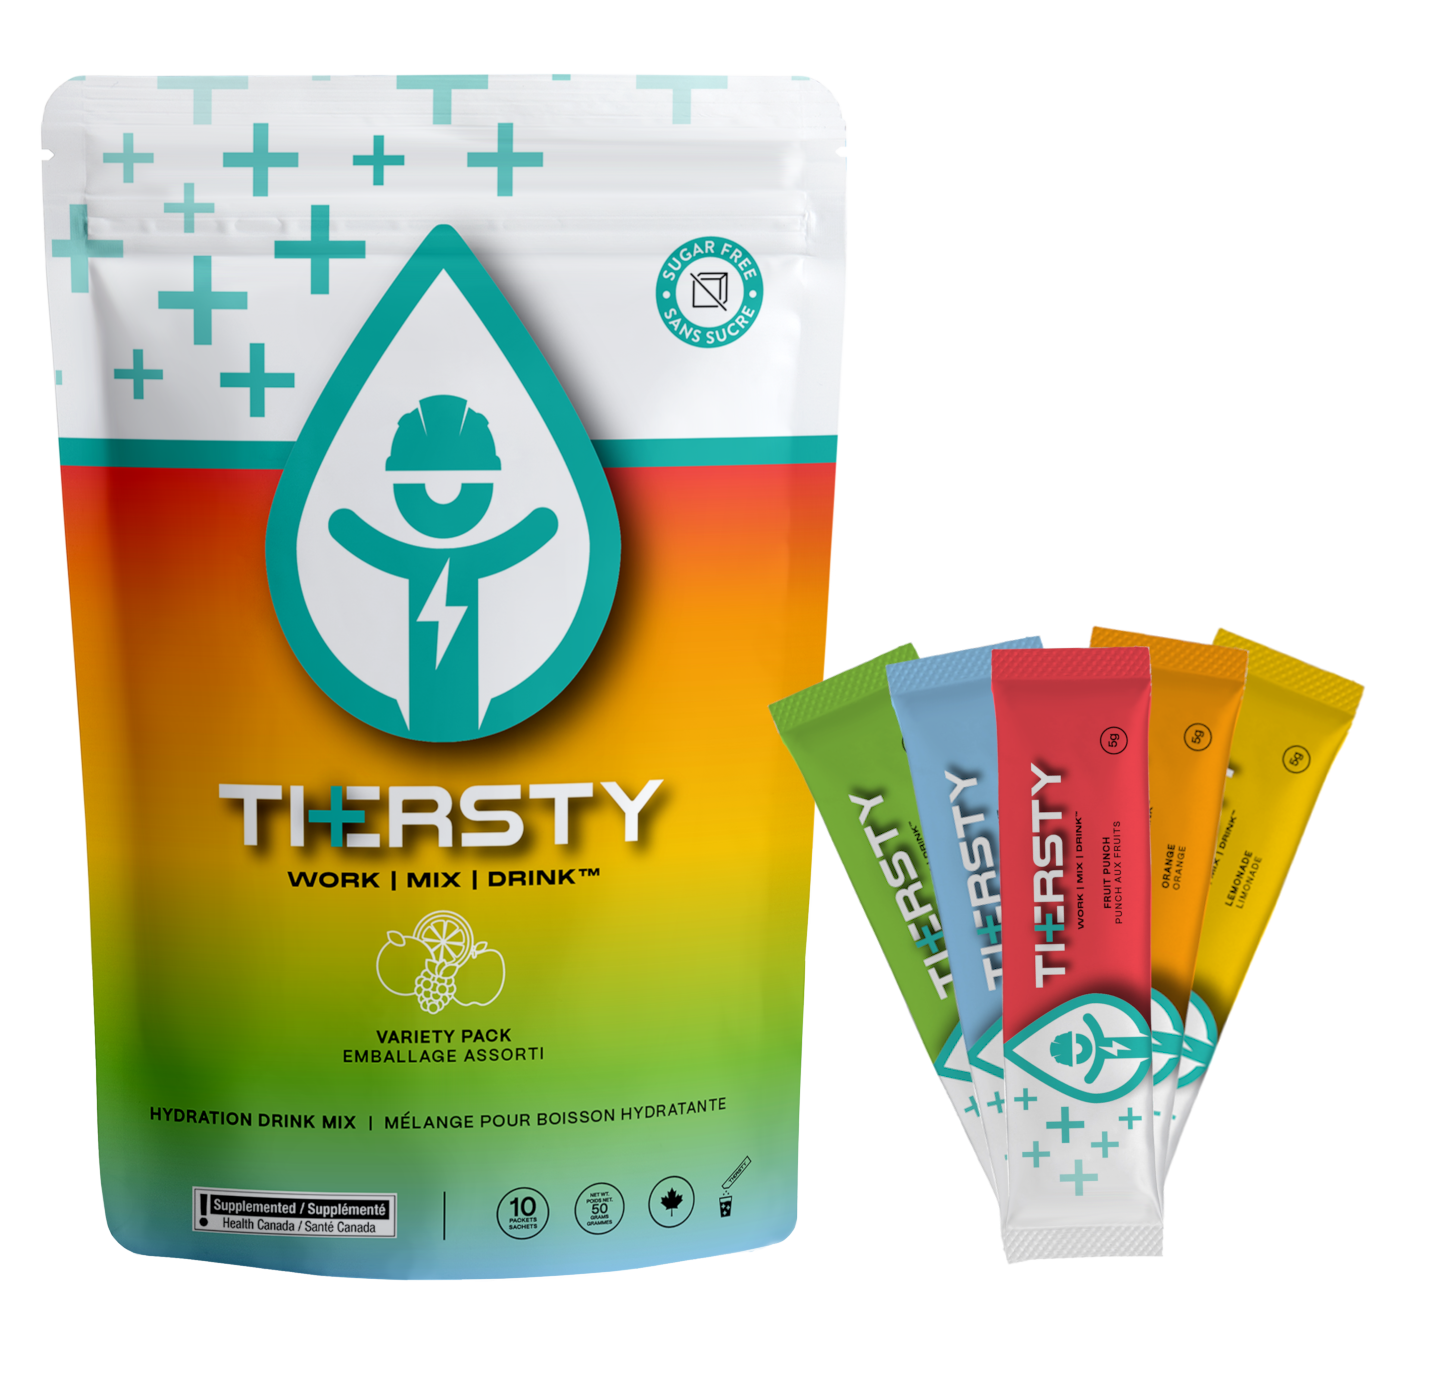 Thersty variety pack of hydration drink mix